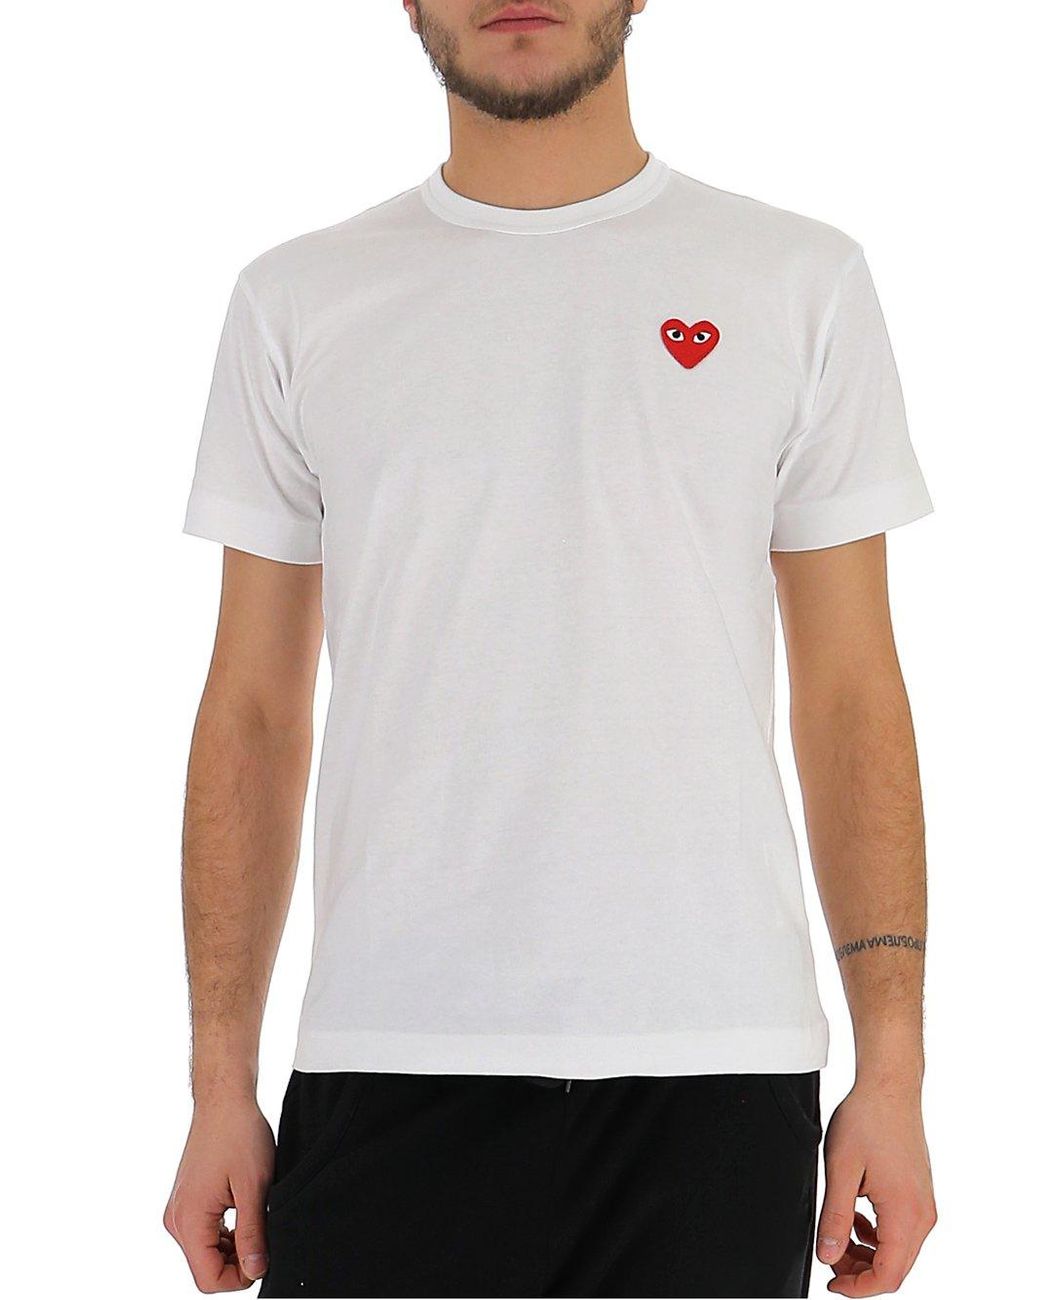 PLAY COMME des GARCONS Tシャツ・カットソー M 白なし開閉